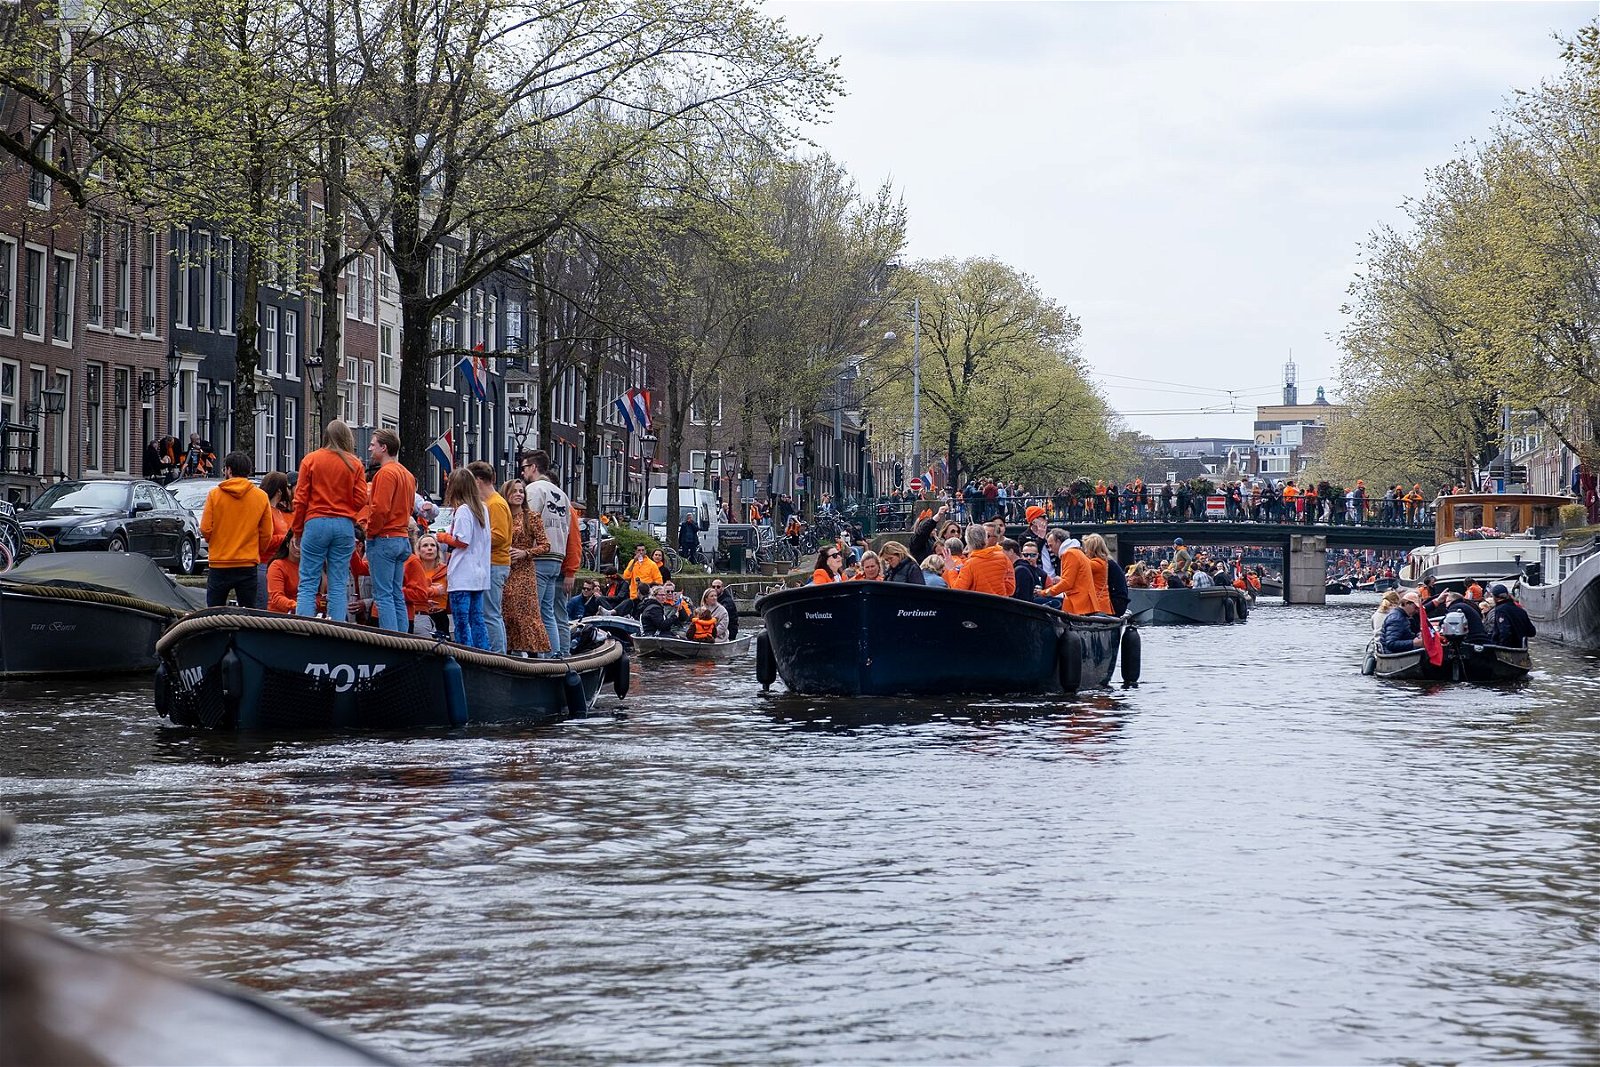 King's day